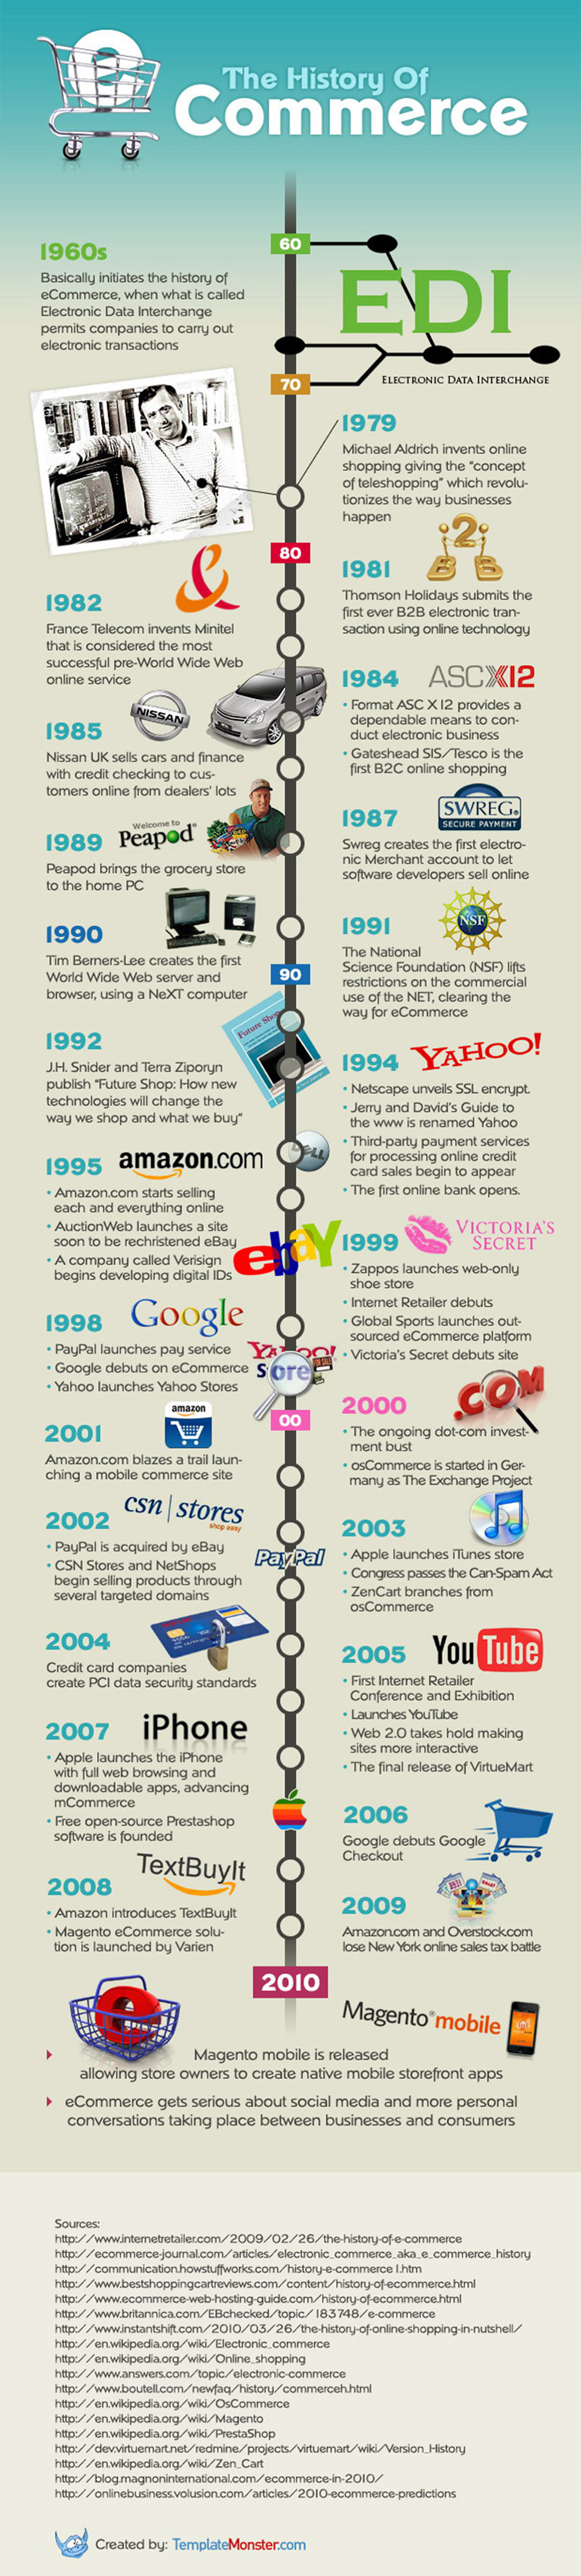 History of eCommerce Infographic